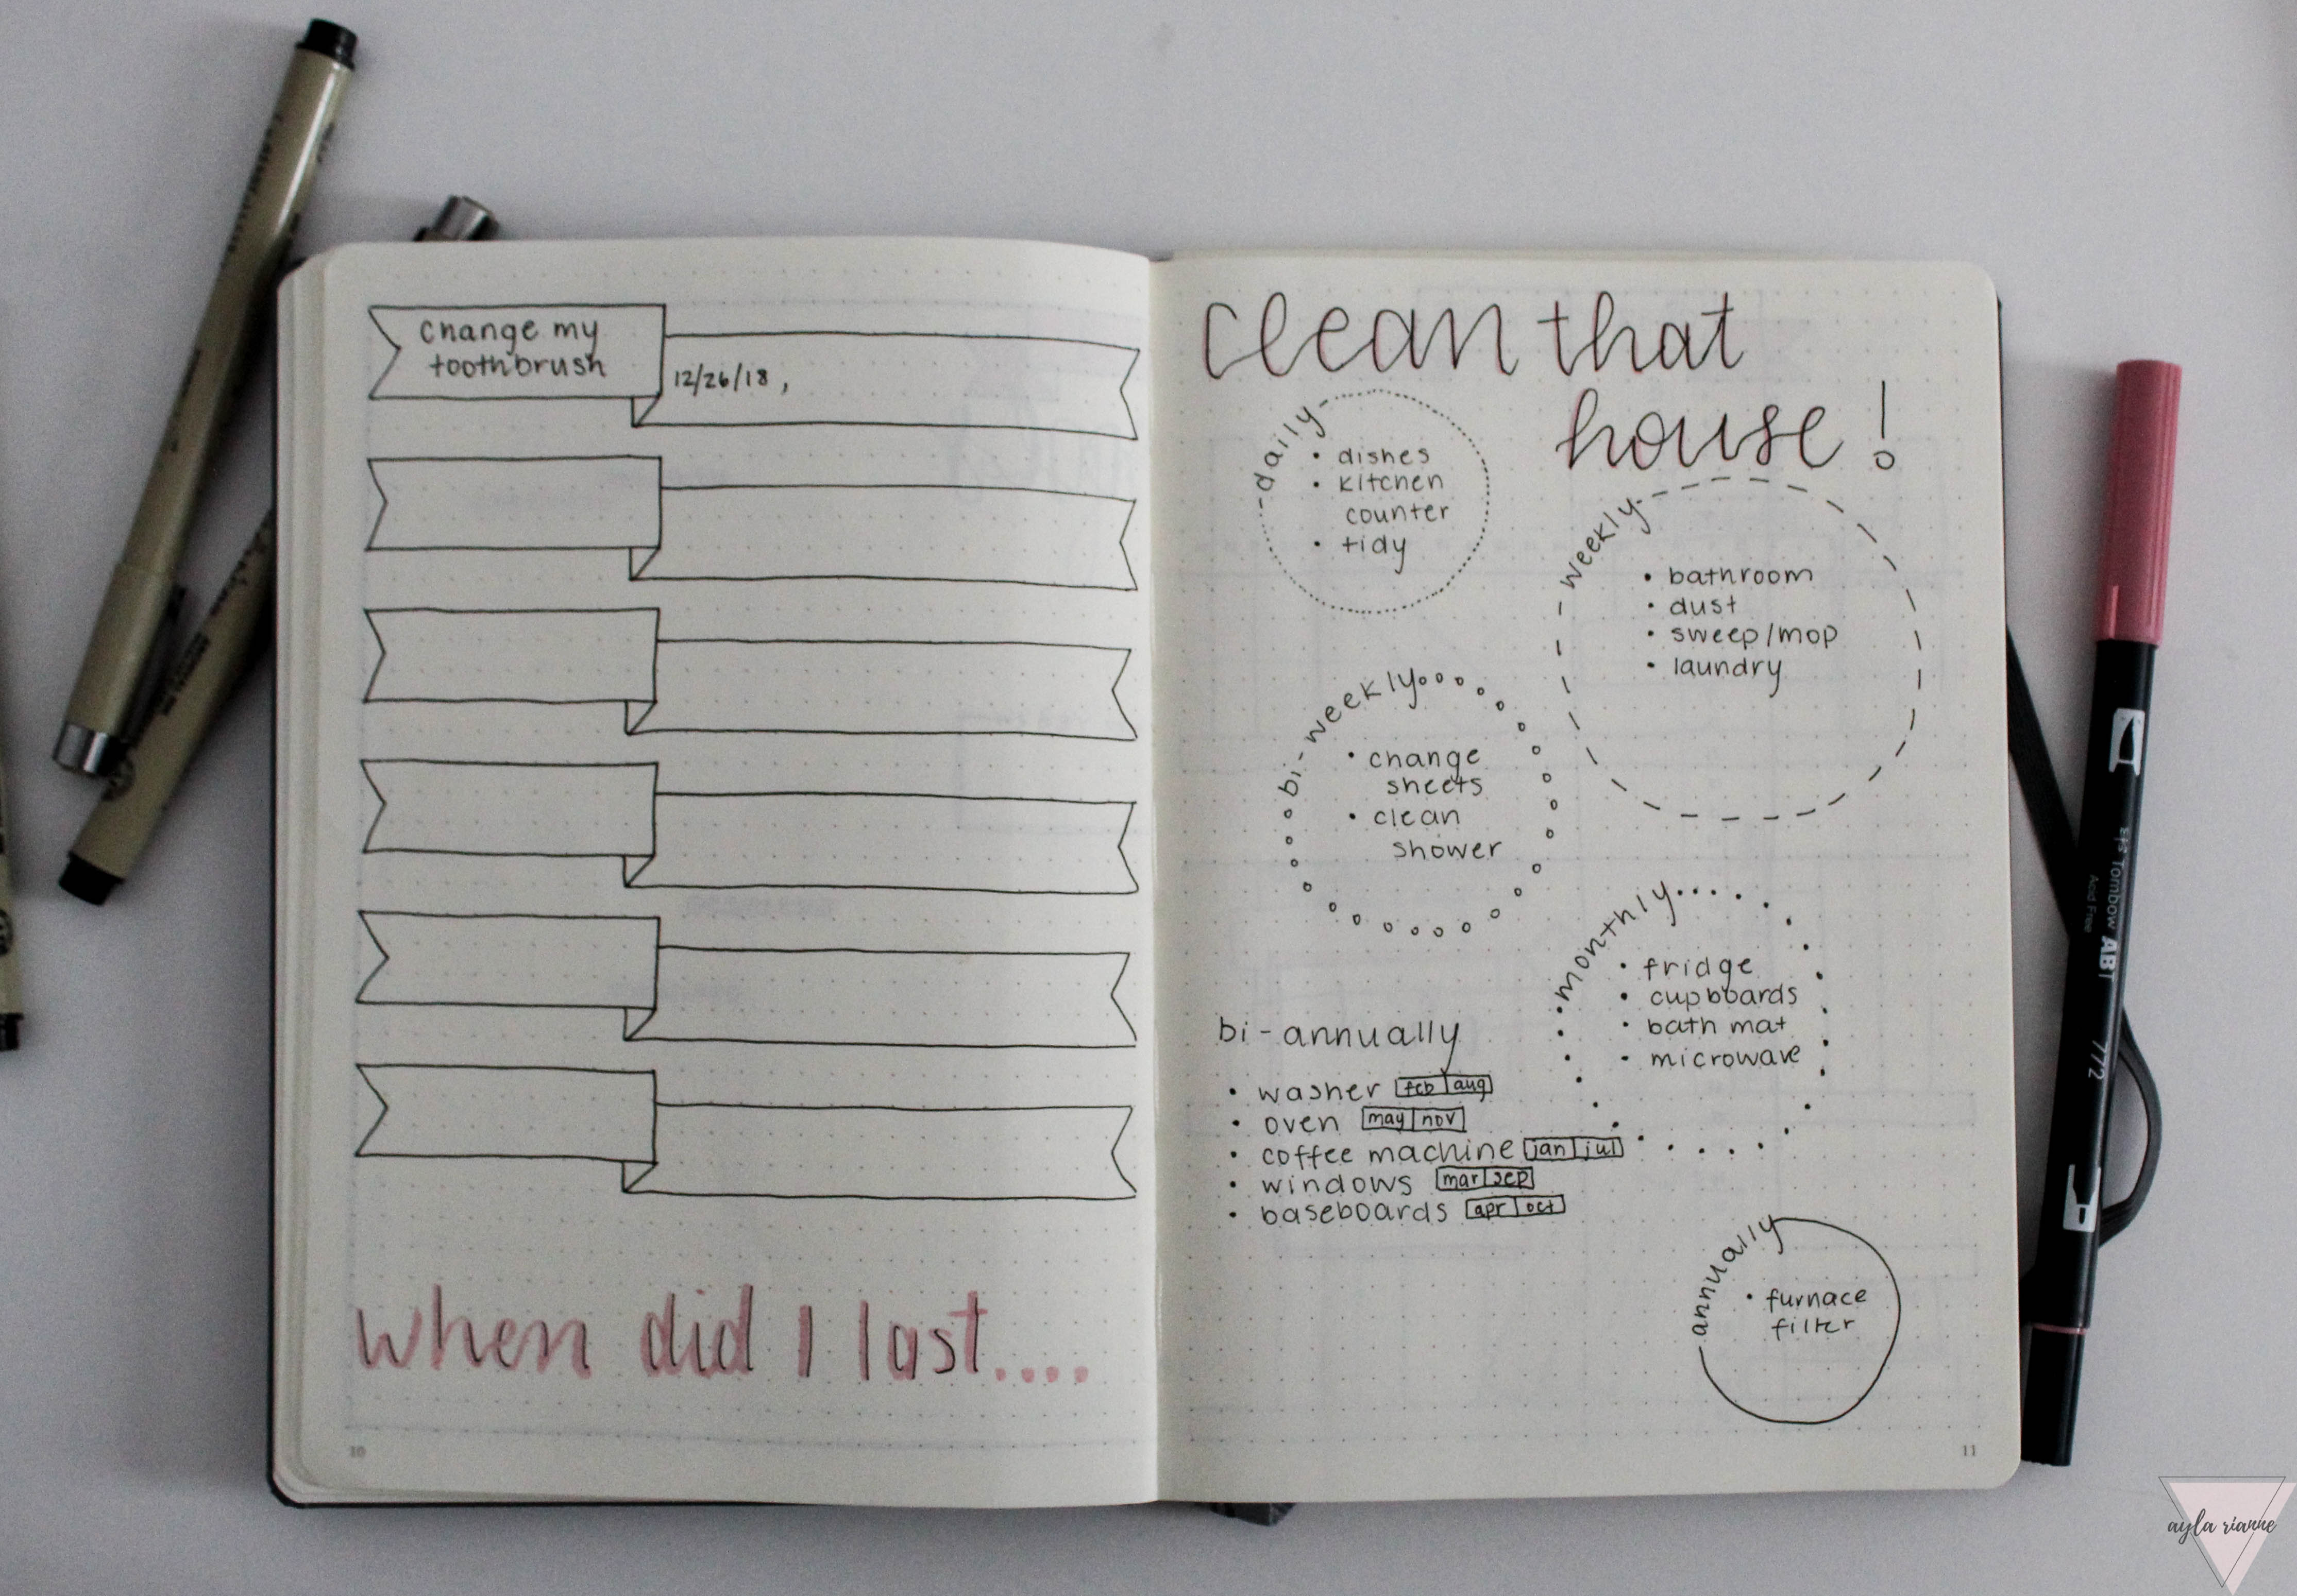 When Did I Last... and a Clean That House Bullet Journal Spread #aylarianne #bulletjournal #whendidIlast #cleanthathouse